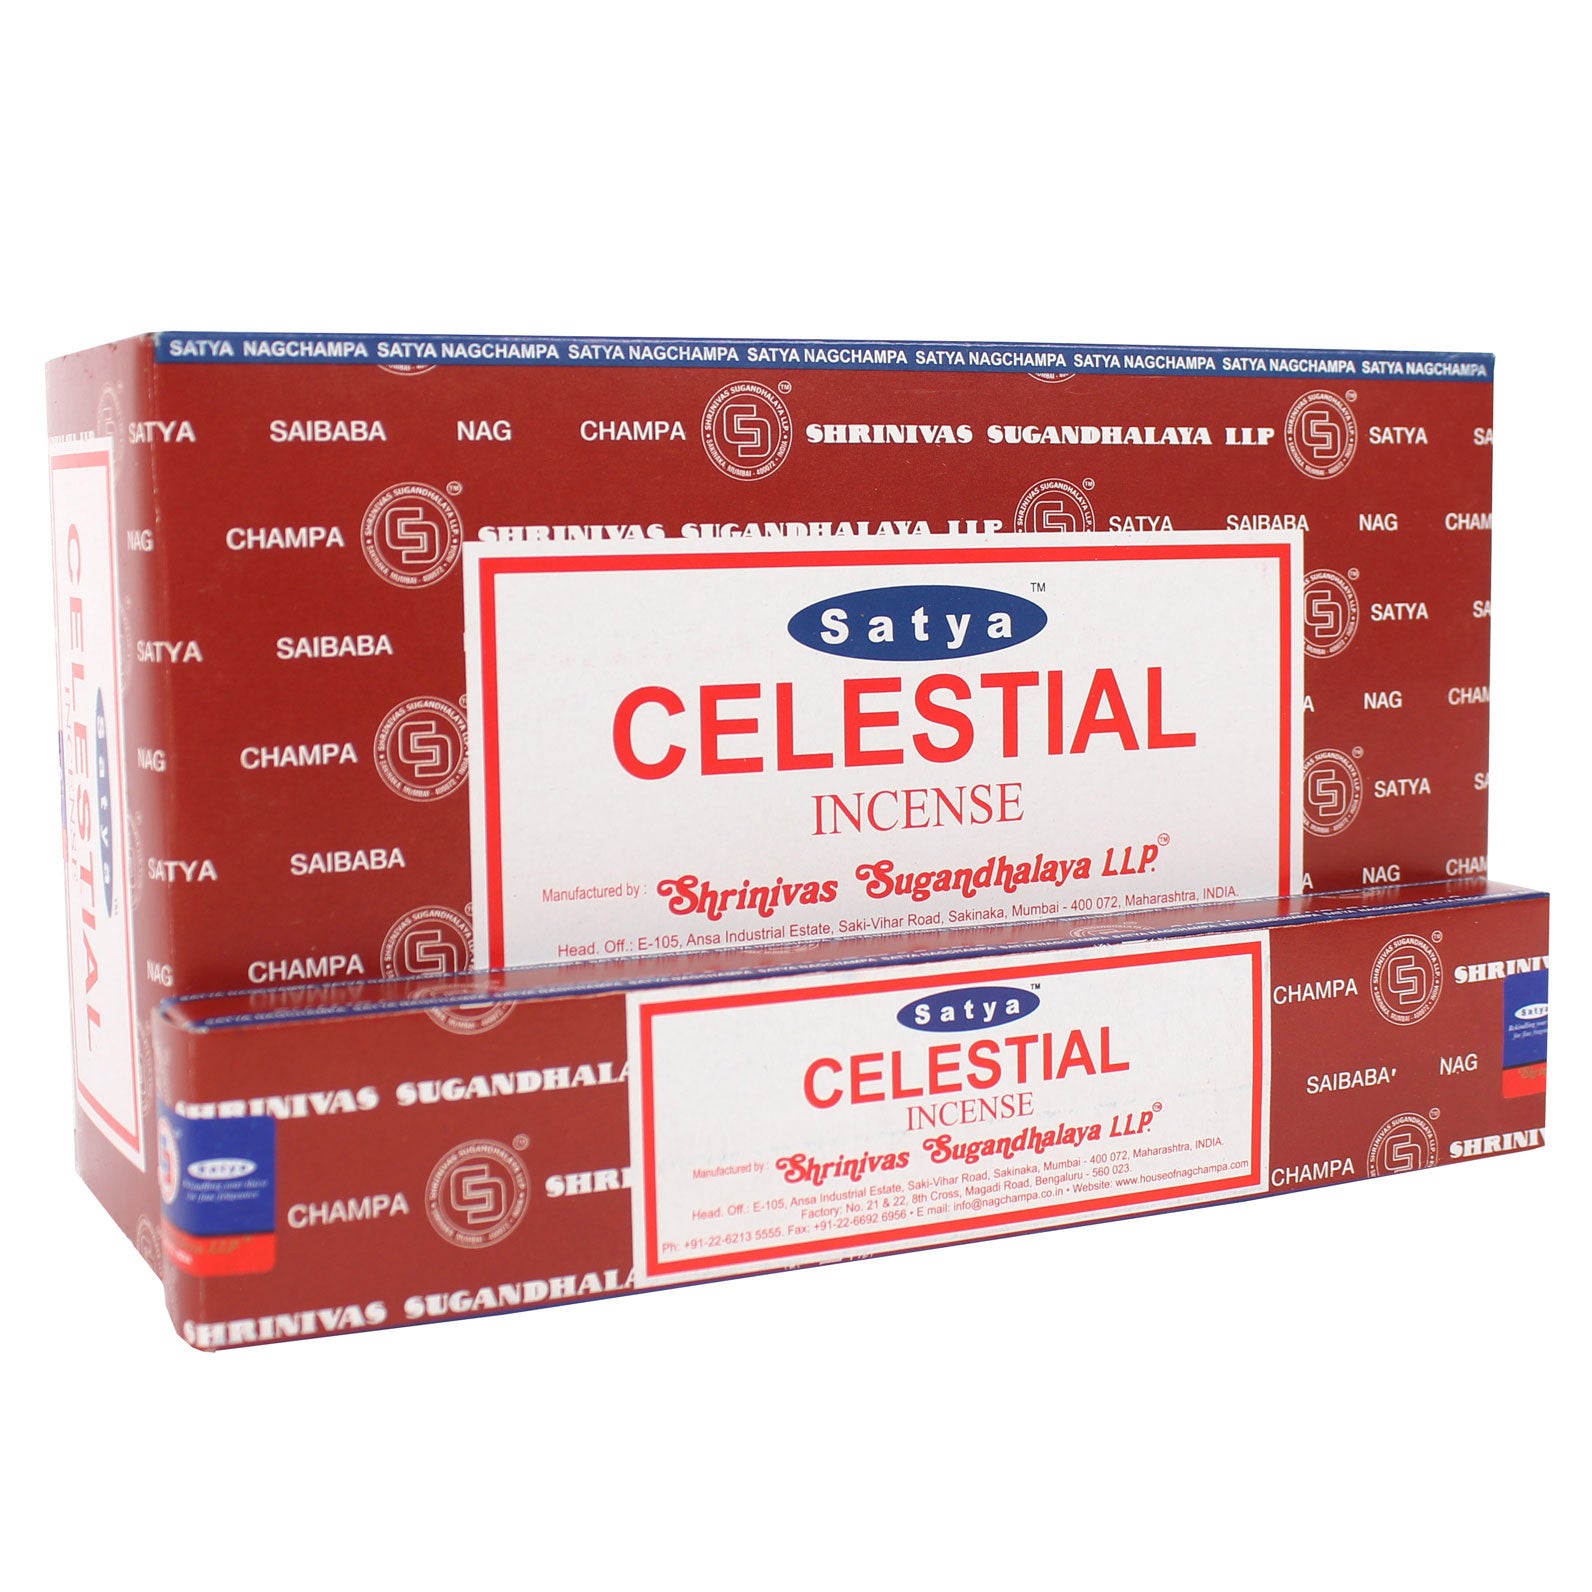 View 12 Packs of Celestial Incense Sticks by Satya information